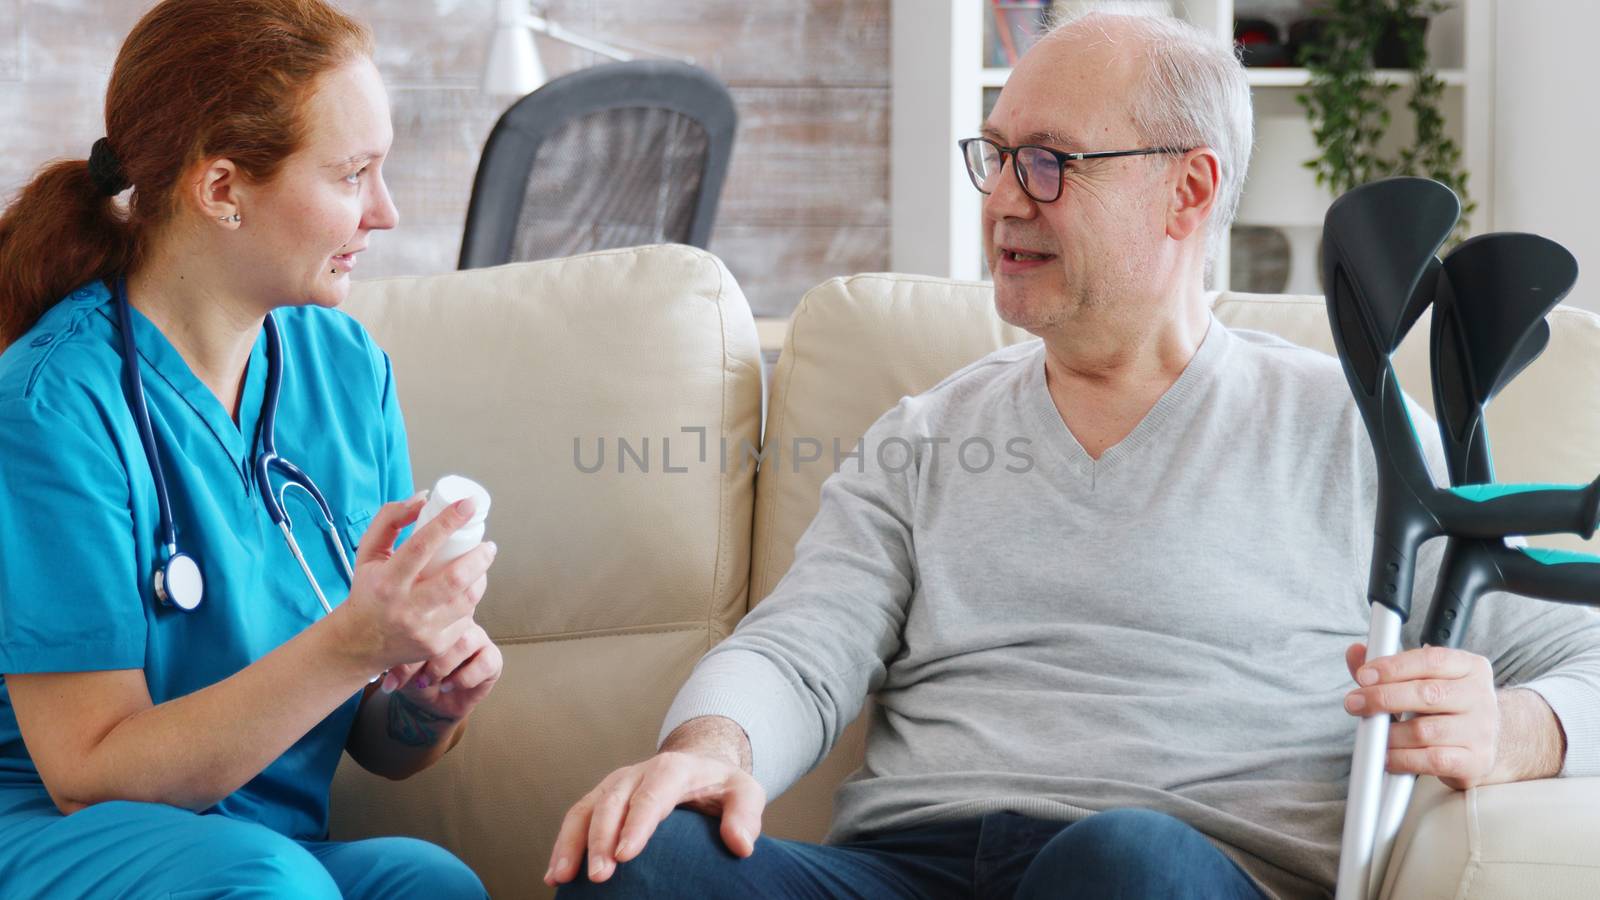 In retirement home nurse is talking with elderly man about drugs dosage by DCStudio